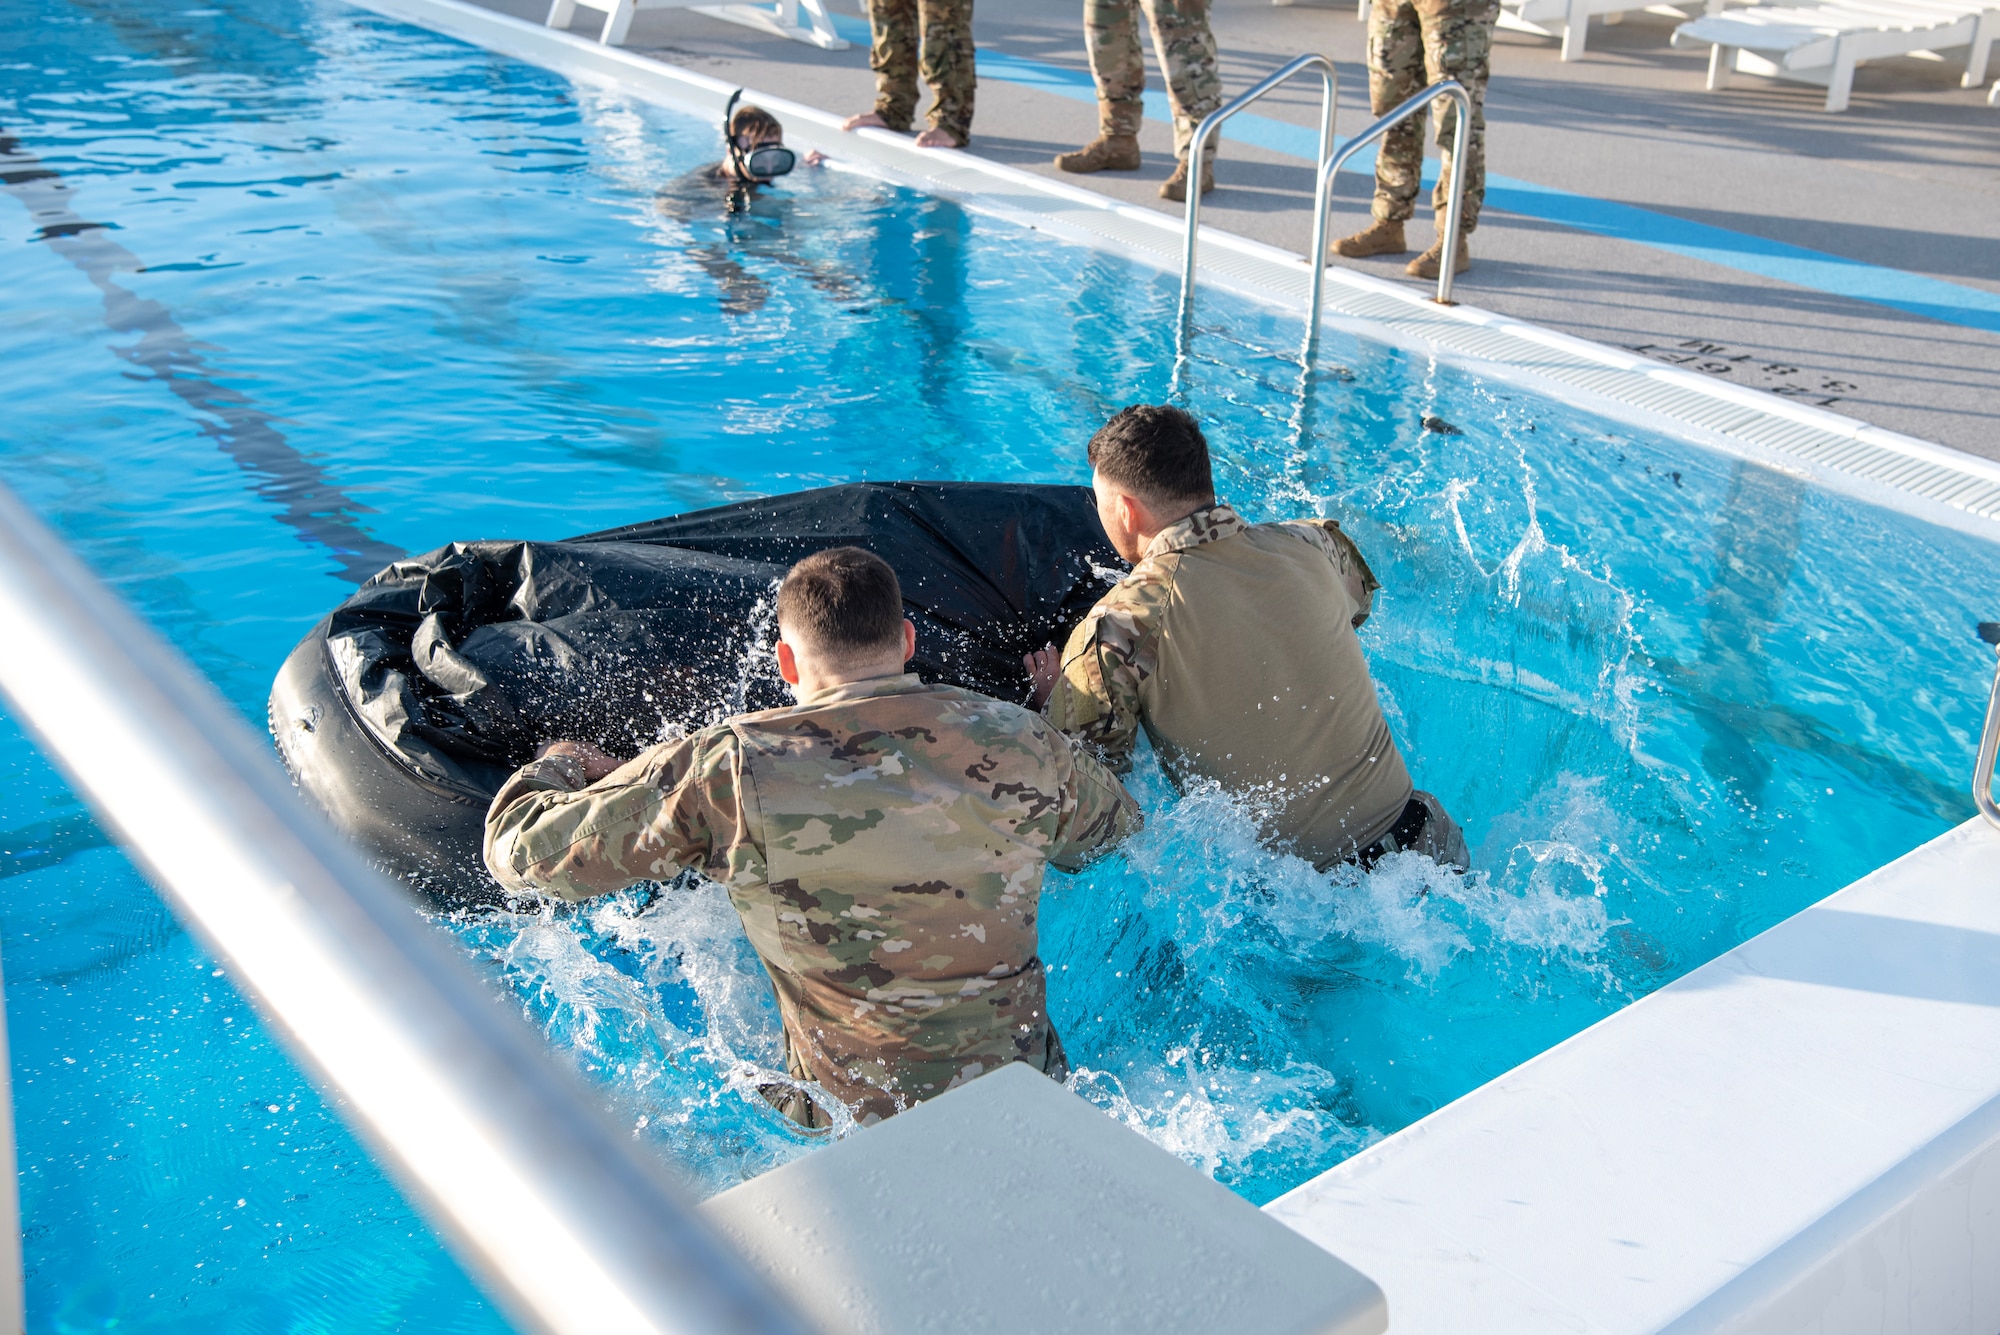 military member jump into a pool and push a raft